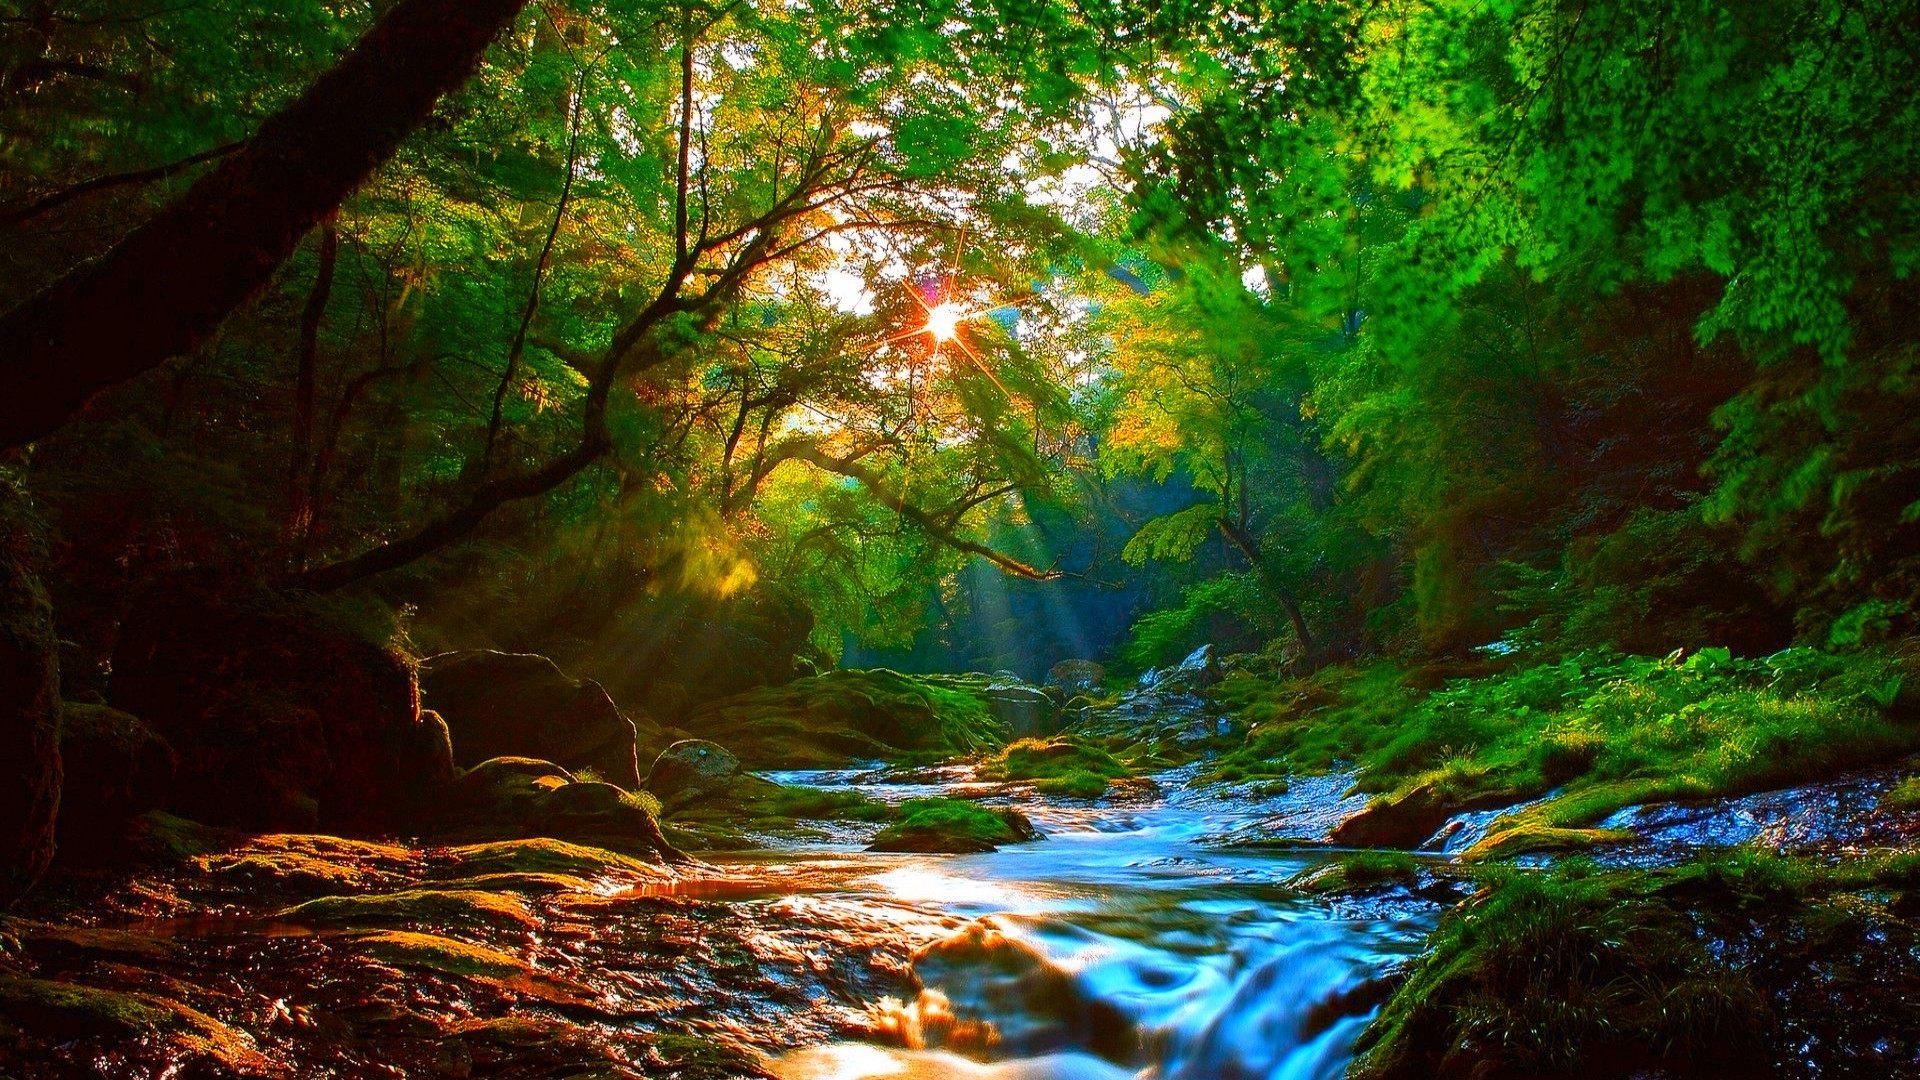 Forest River Wallpaper For Mac Stream Background